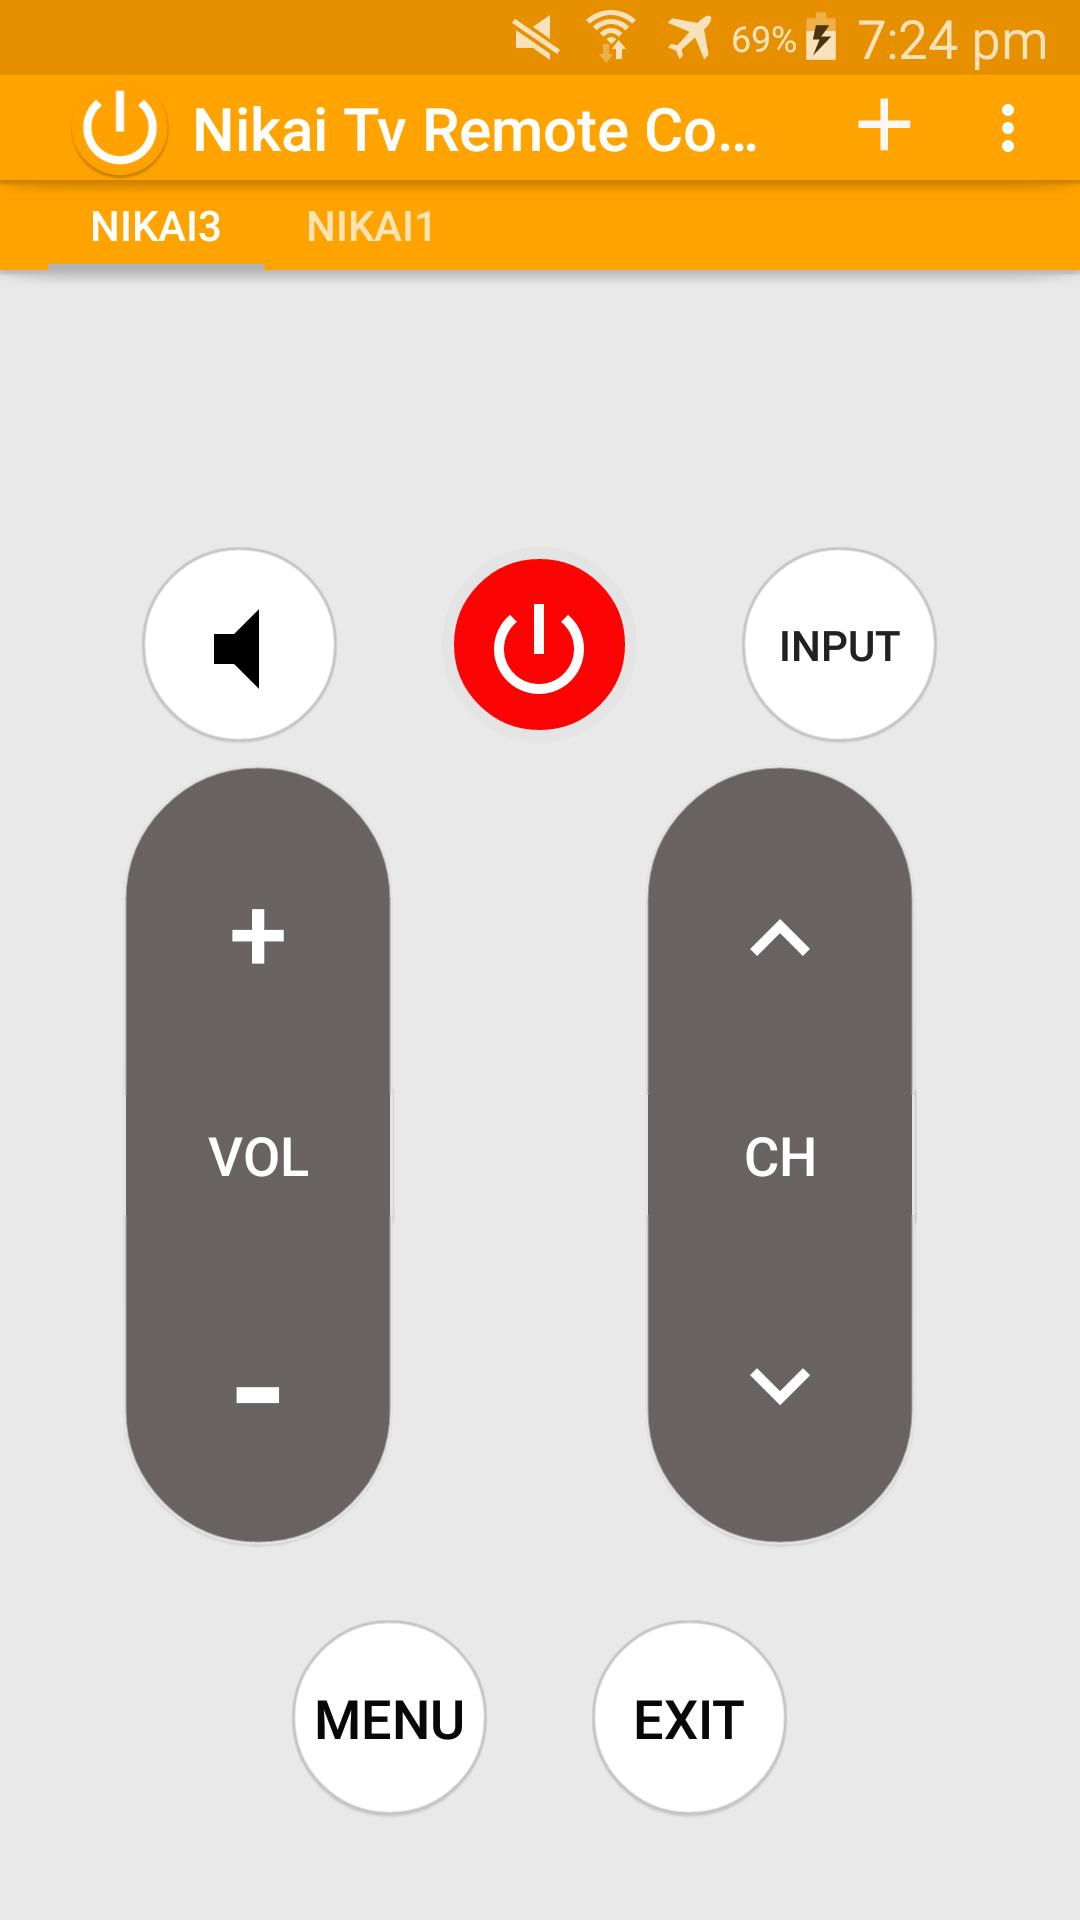 Nikai Tv Remote Control for Android - APK Download